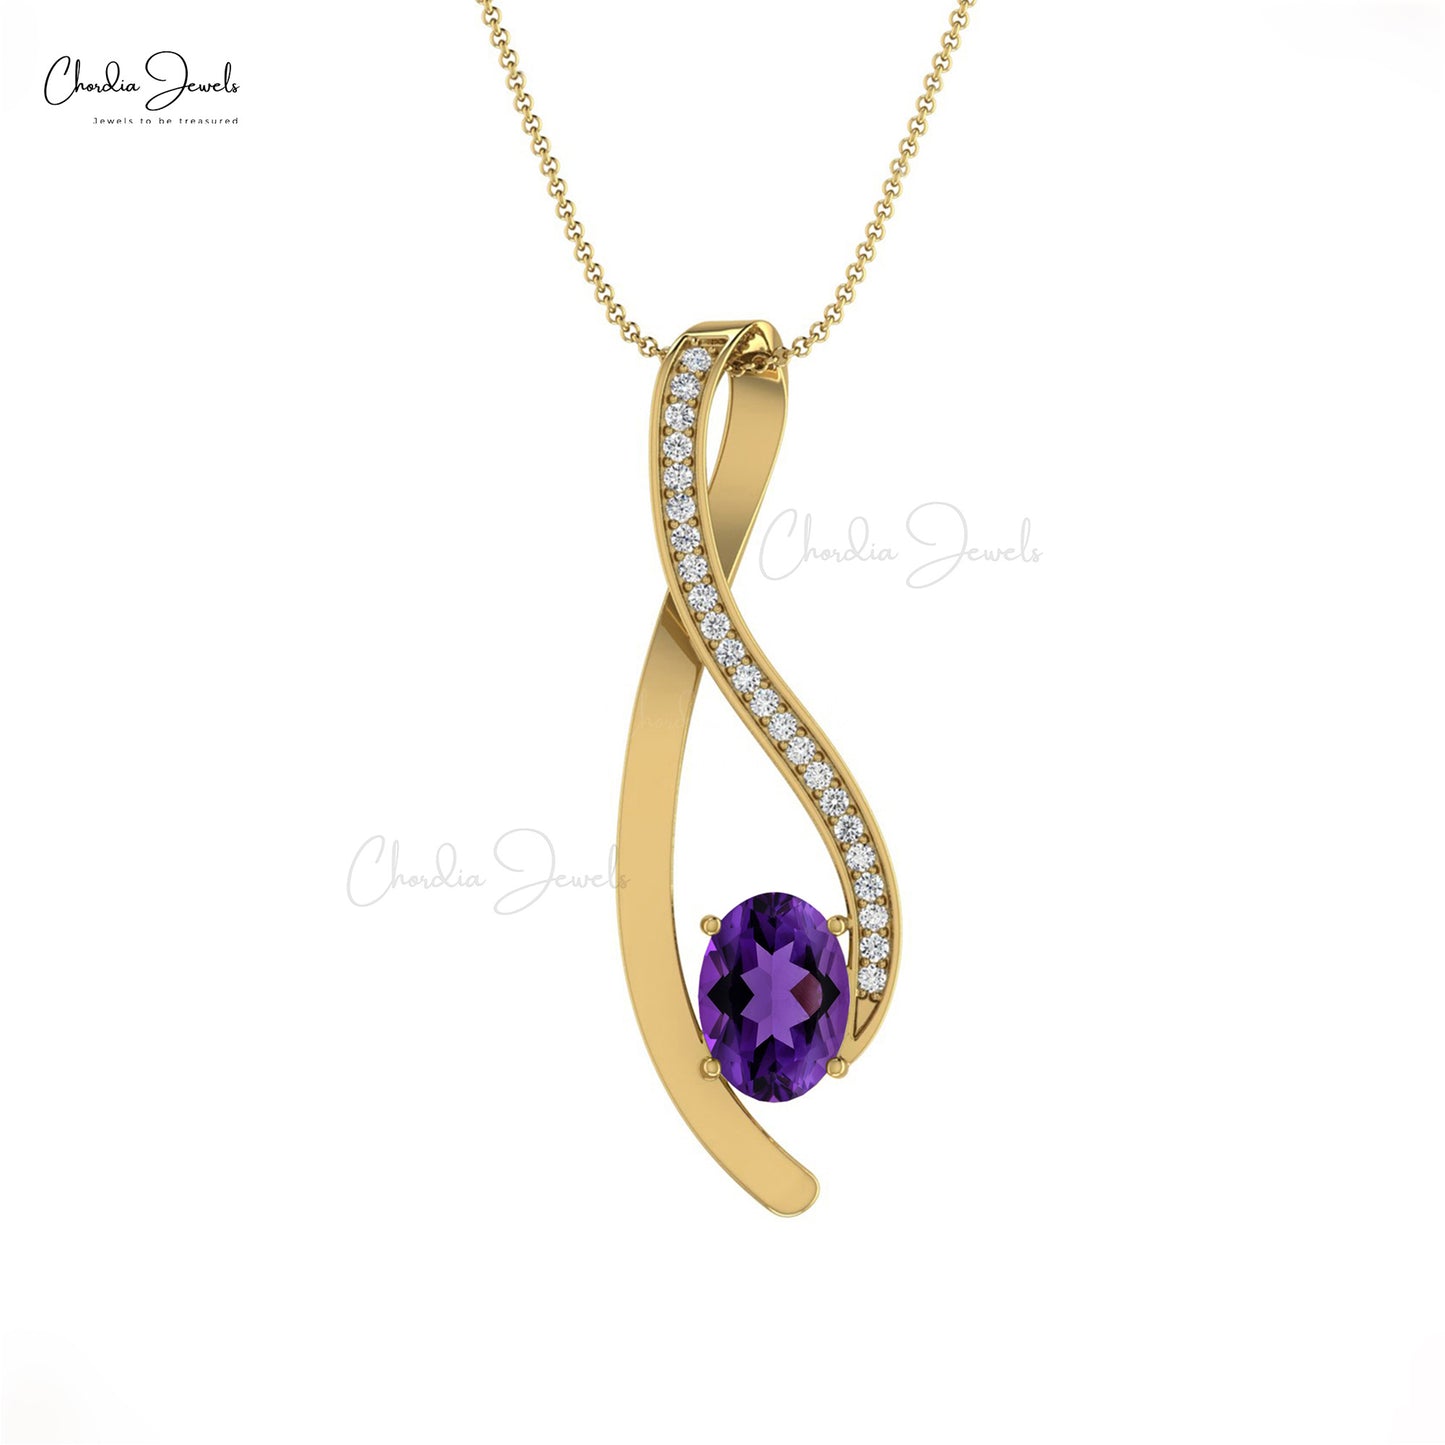 Genuine Amethyst Curve Pendant, 14k Solid Gold Diamond Pendant, 6x4mm Oval faceted Gemstone Pendant Gift for her